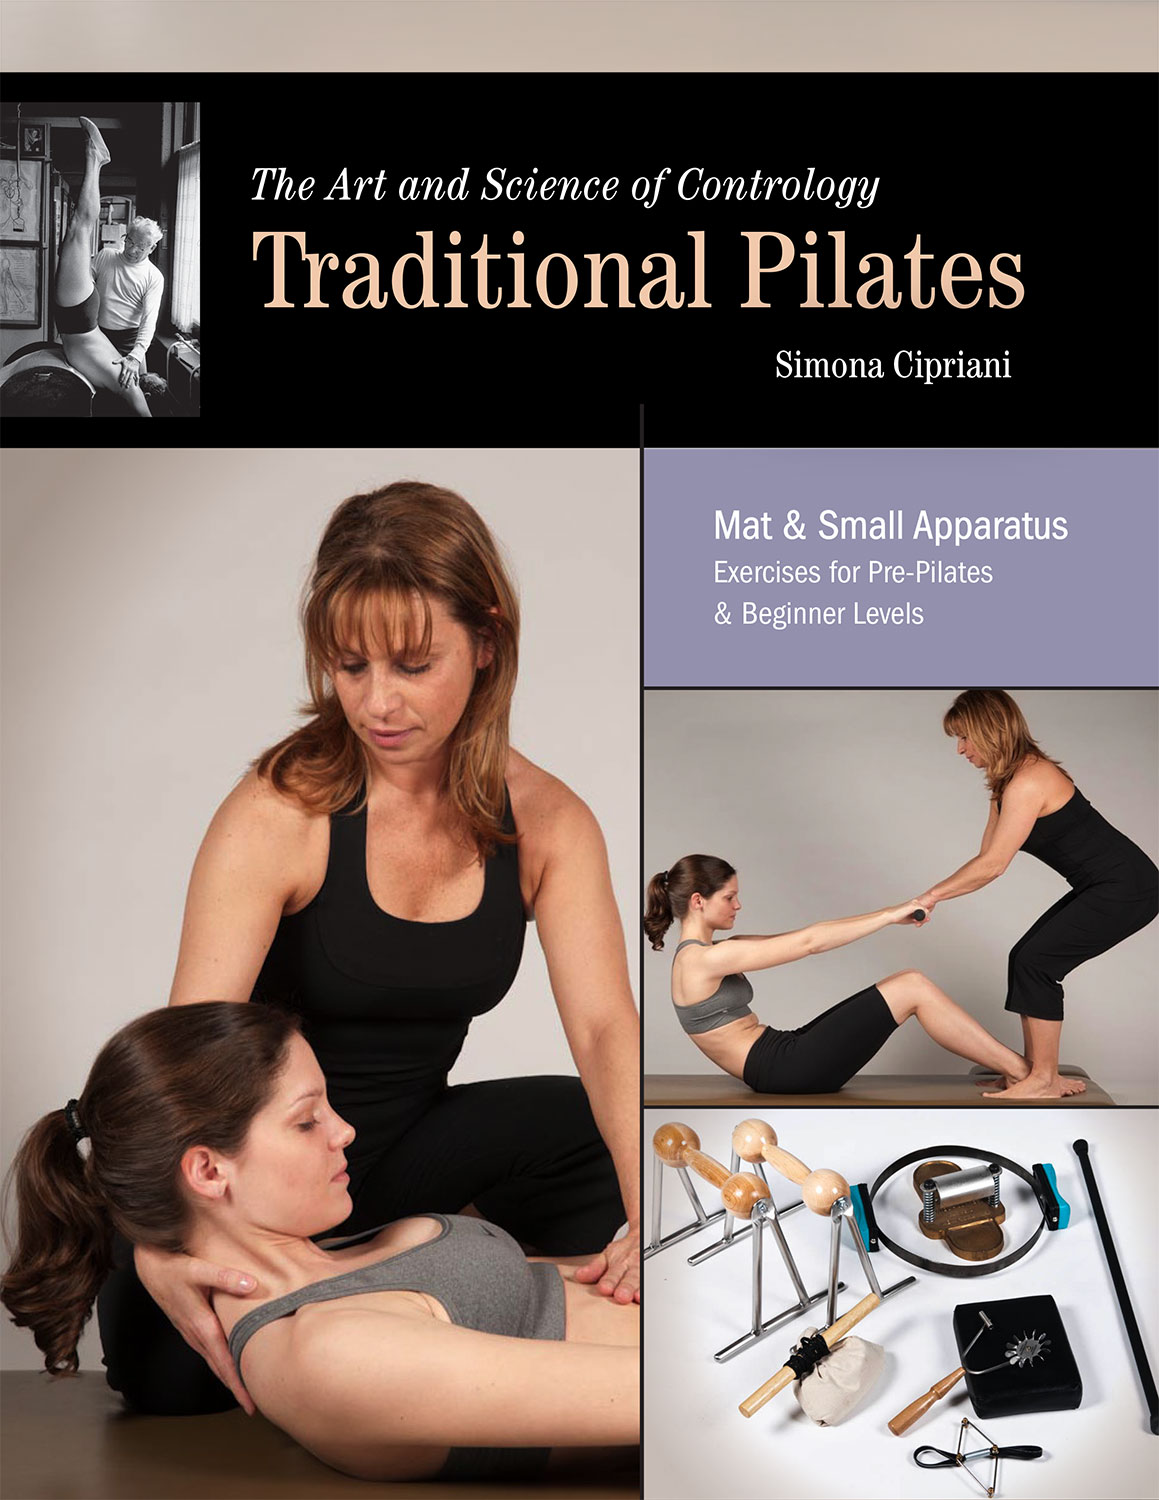 Staystrongpilatesibiza - *Mat Pilates Routine* There is an original  traditional order to the Pilates mat exercises as developed by Joseph  Pilates. The exercises in the traditional program create a challenging  workout, especially